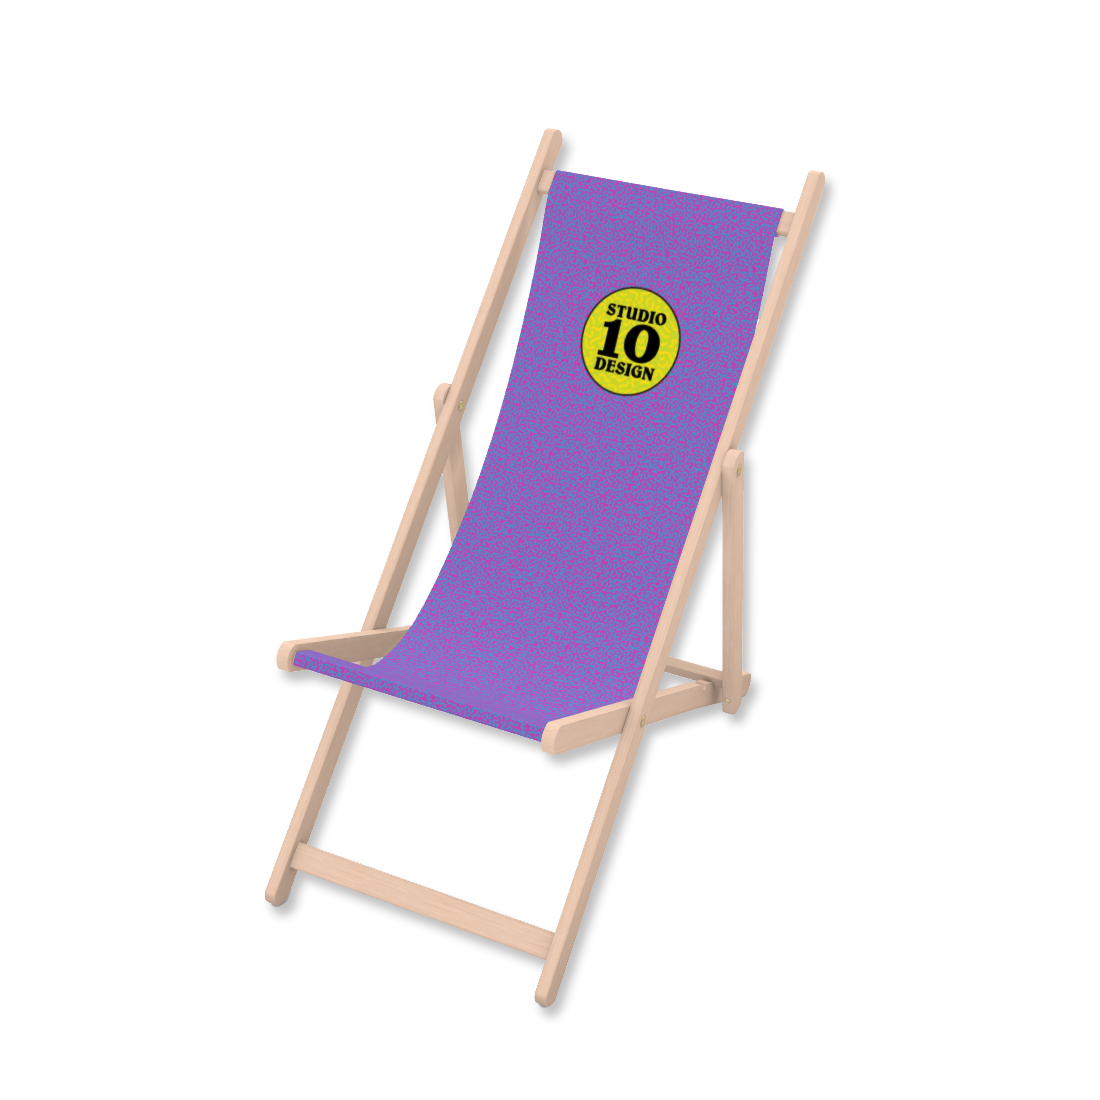 Deck Chairs with Canvas Slings printed with exclusive Studio Ten Designs